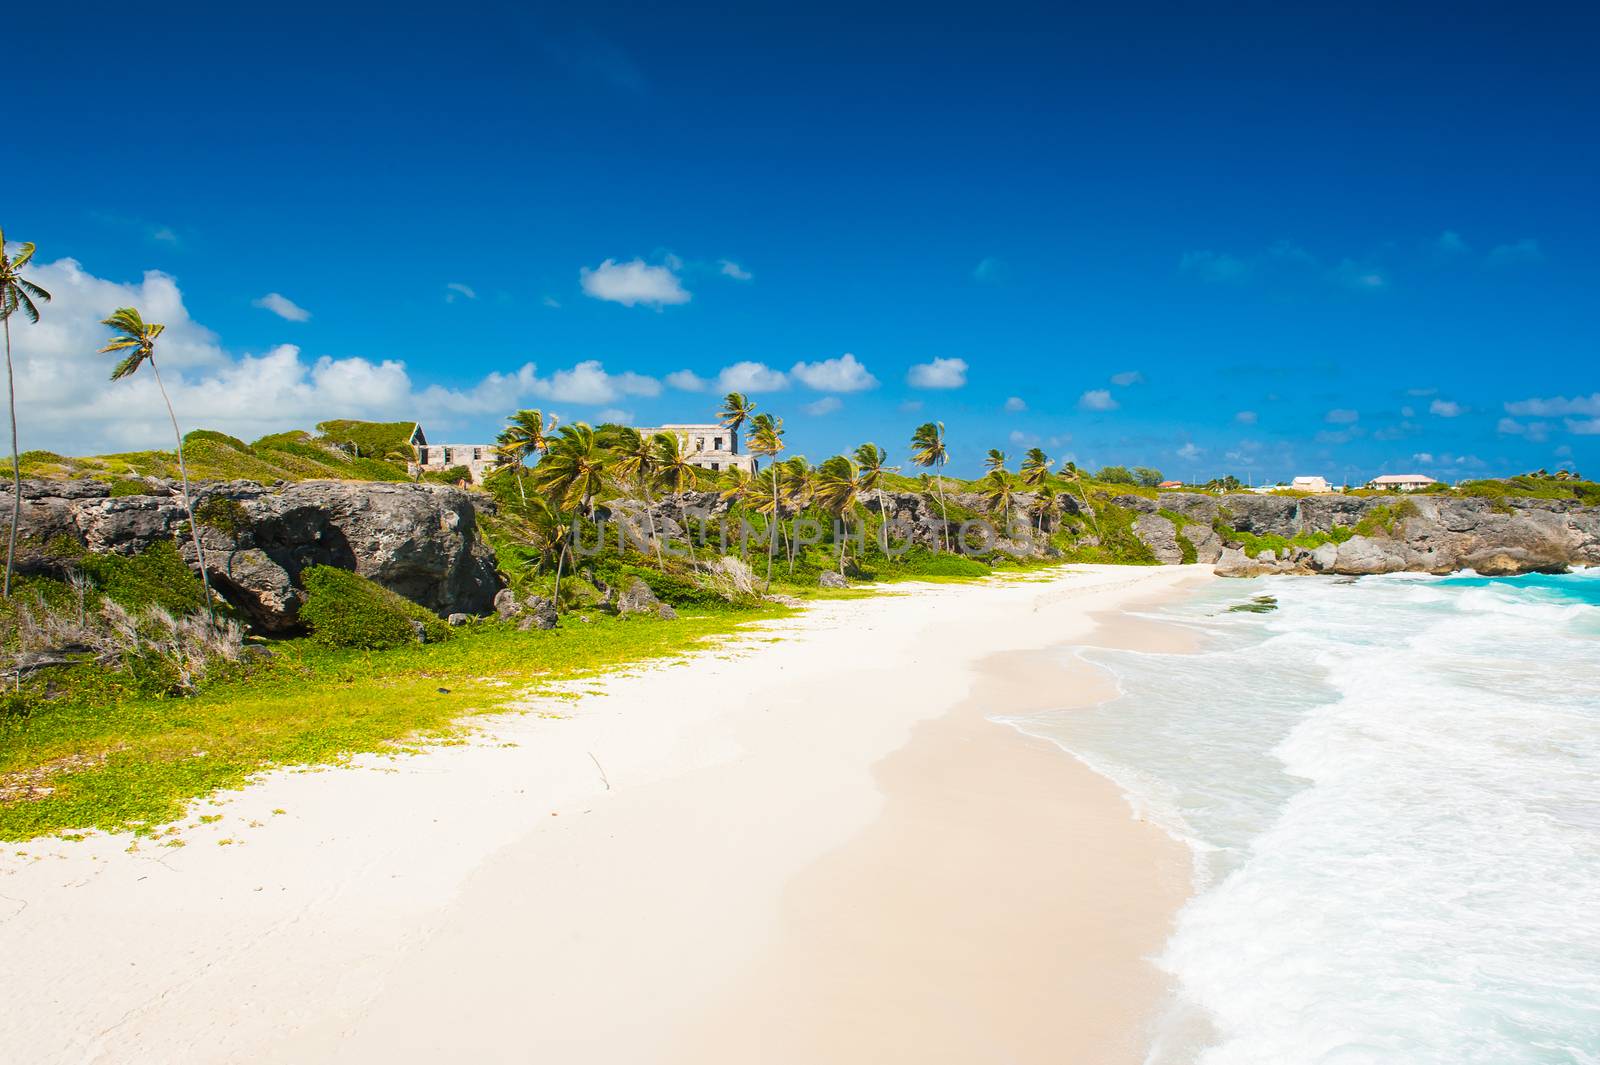 Harrismith Beach is one of the most beautiful beaches on the Caribbean island of Barbados. It is a tropical paradise with palms hanging over turquoise sea and a ruin of an old mansion on the cliff